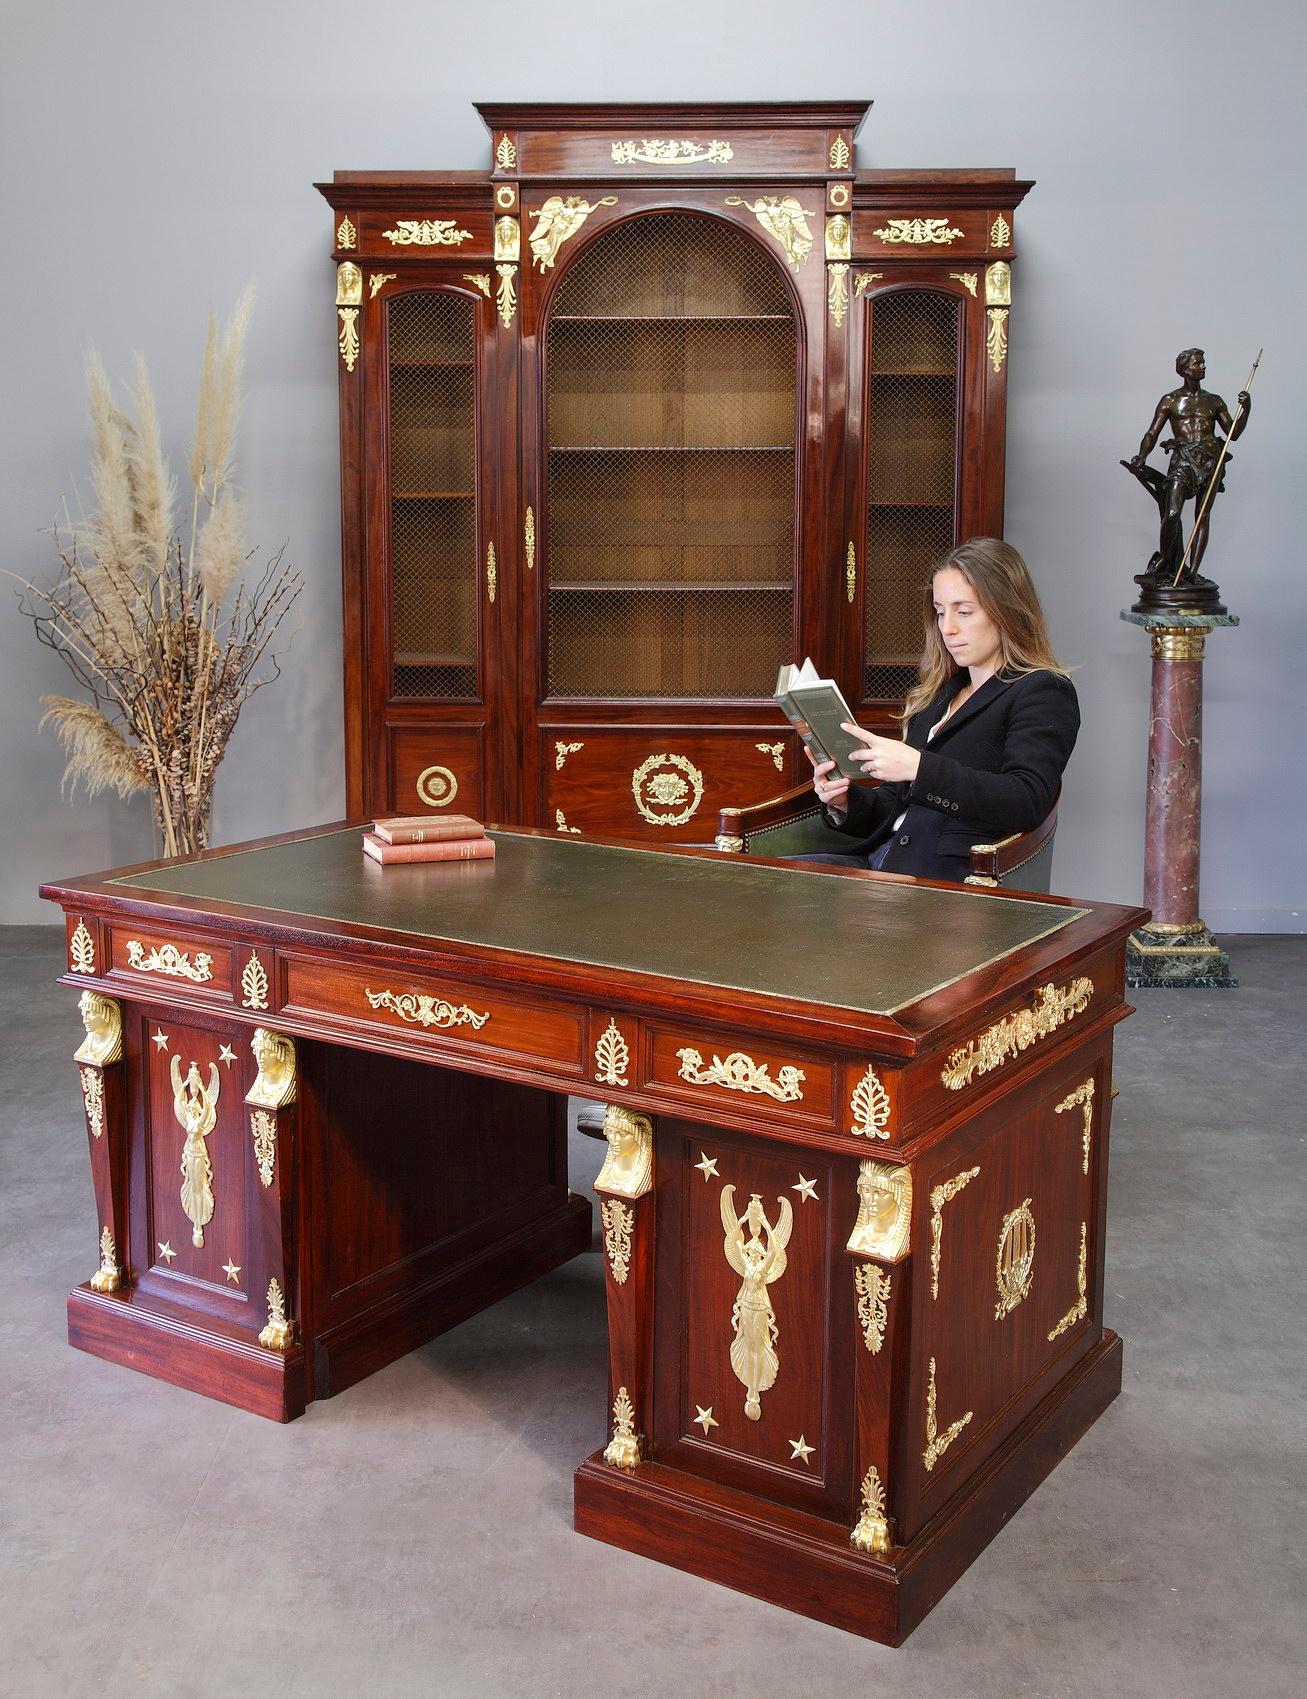 Very beautiful Empire-style bookcase. This monumental cabinetry masterpiece combines luxurious materials such as mahogany and mahogany veneer, with the expert craftsmanship of the Empire style. Balanced and beautifully proportioned, the cabinet is